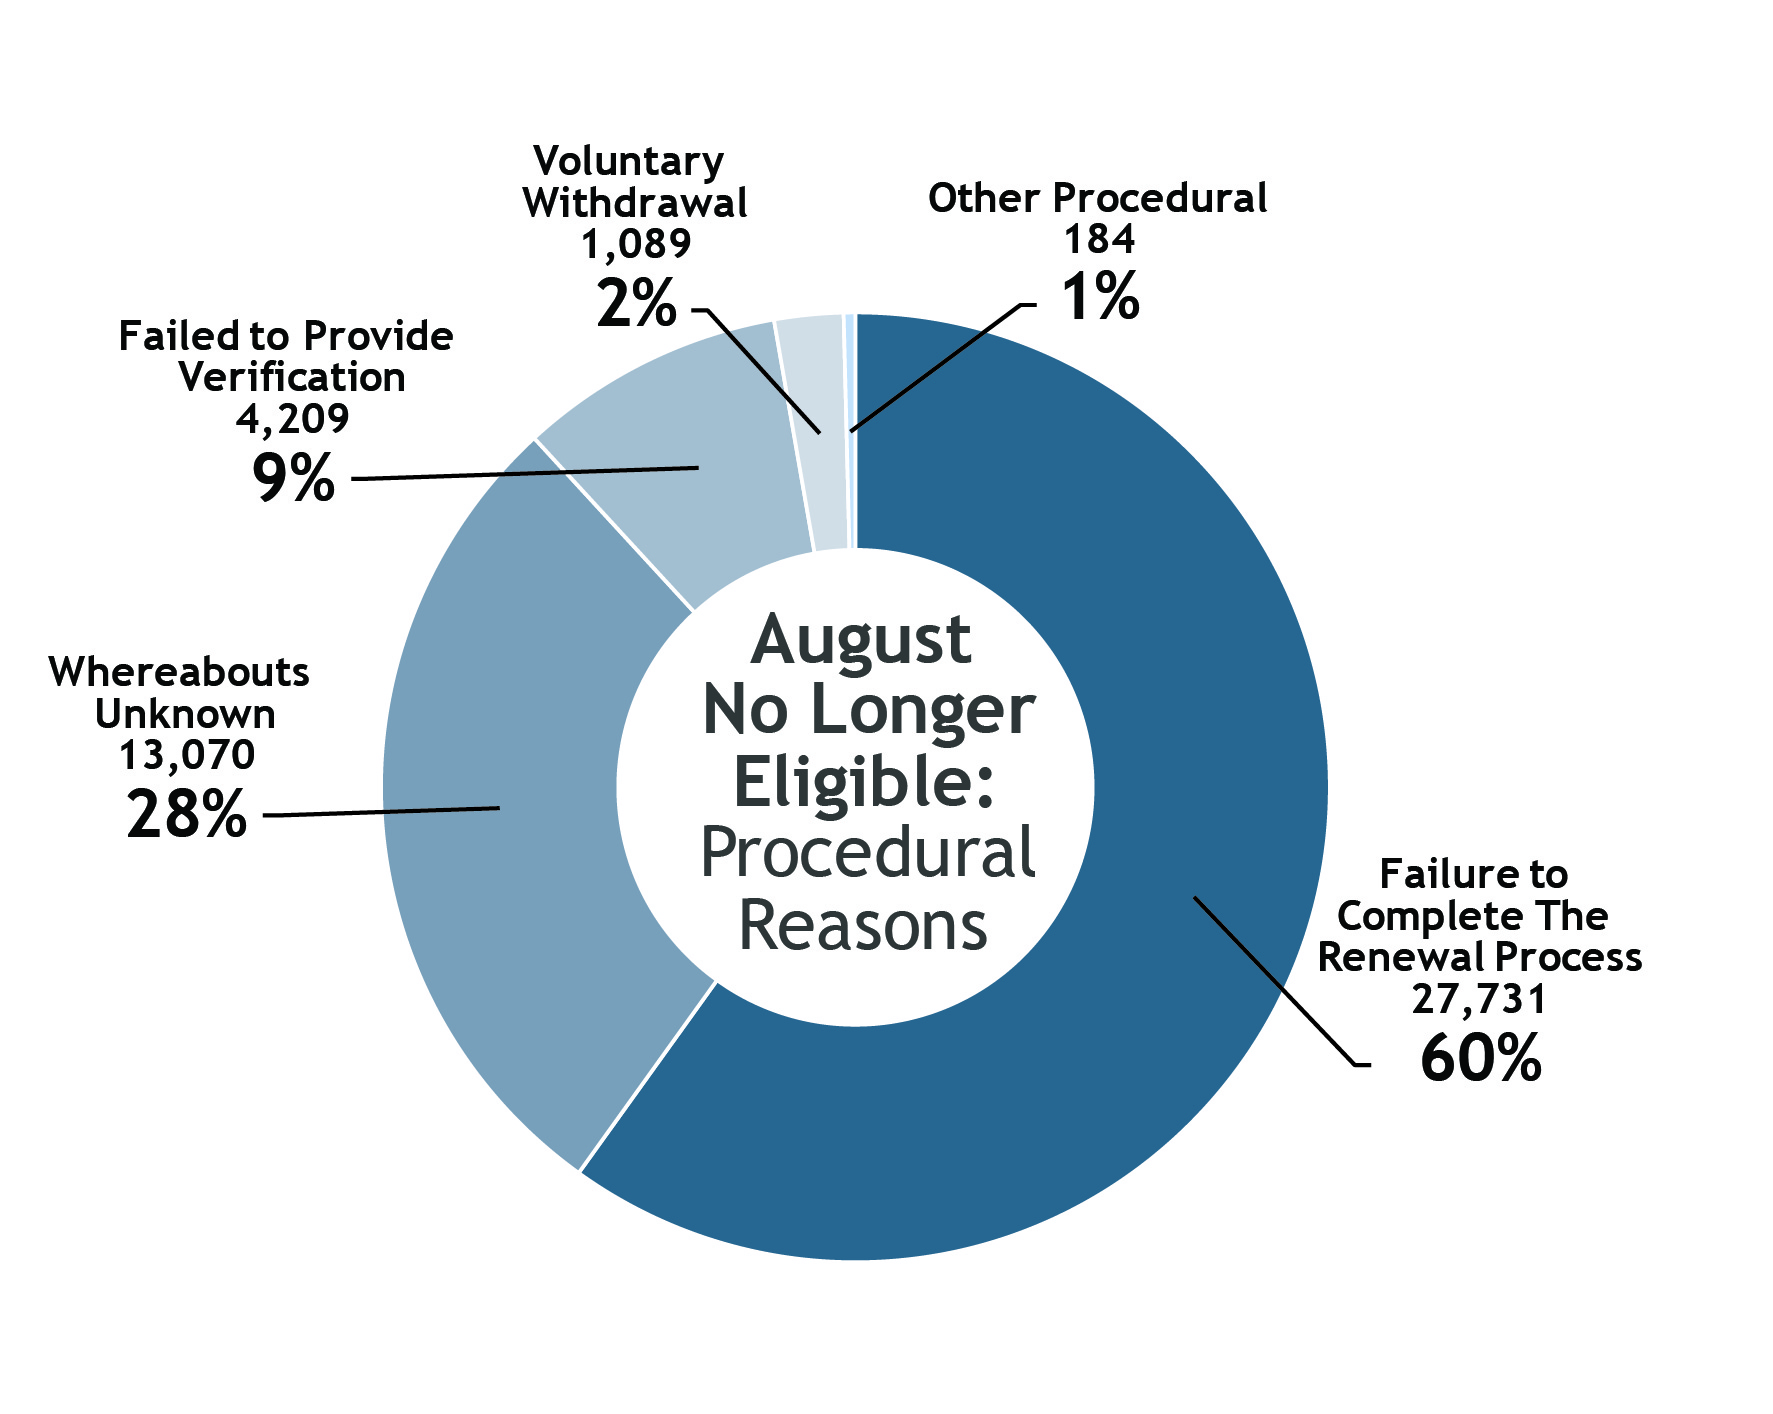 Donut chart showing detail of August Renewals section of No Longer Eligible for Procedural Reasons with failure to complete the renewal process 27,731 the largest at 60%, whereabouts unknown 13,070 at 28%, failed to provide verification 4,209 at 9%, voluntary withdrawal 1,089 at 3% and other procedural 184 at 1%.